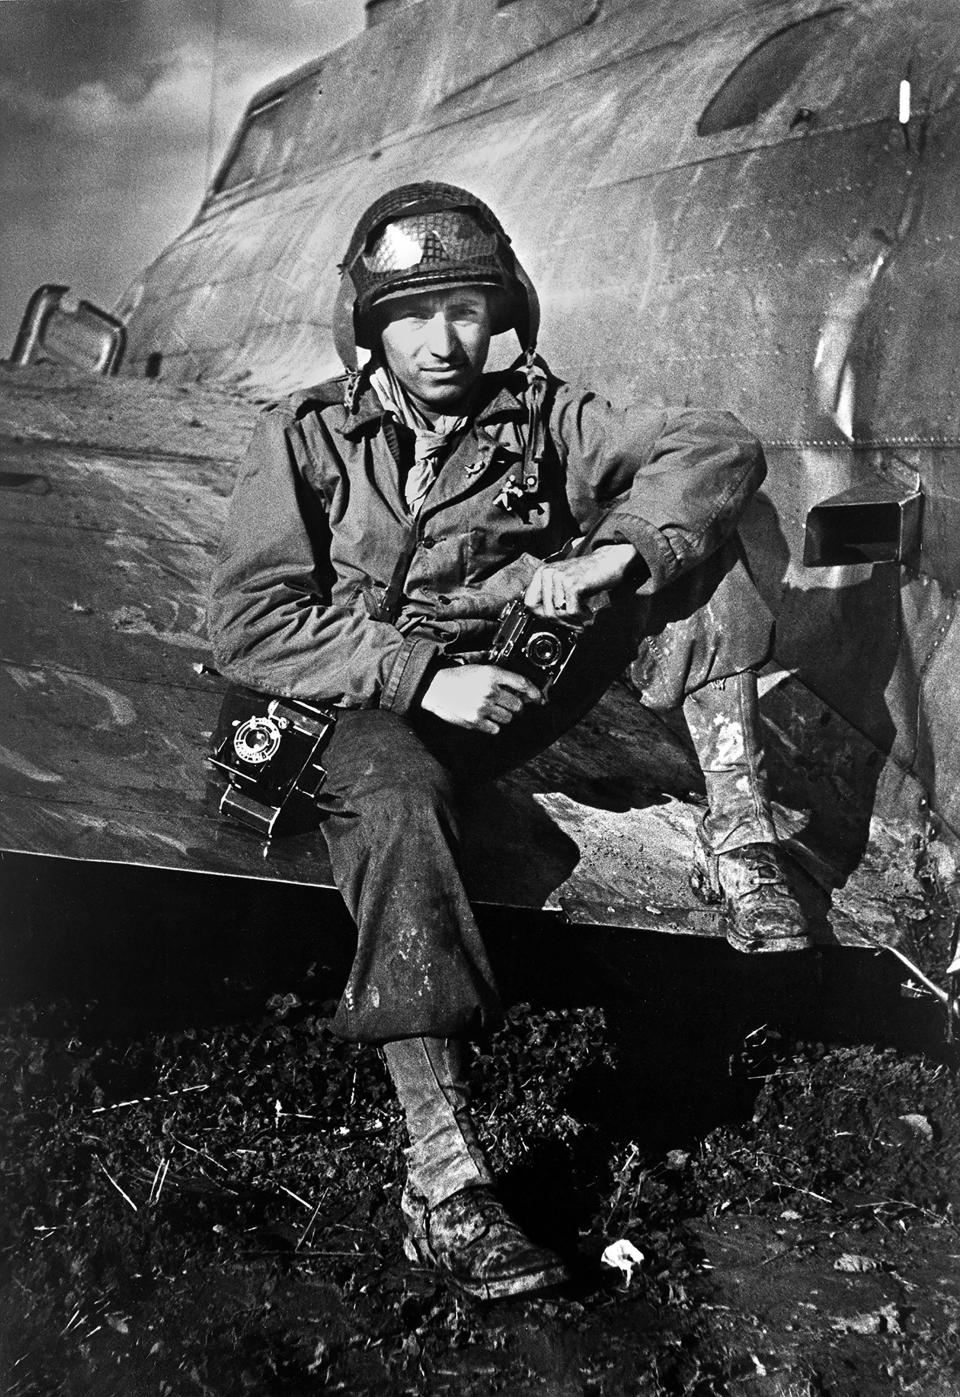 This 1945 photo shows photographer PFC Tony Vaccaro posing for a photo on the wing of an airplane during WWII. Photographer Tony Vaccaro is one of the few people alive who can claim to have survived the Battle of Normandy and COVID-19. He was dealt a bad hand early, as his mother died during childbirth a few years before tuberculosis claimed his father. By age 5, he was an orphan in Italy, enduring beatings from an uncle. World War II found him an American G.I. (Photo courtesy Tony Vaccaro via AP)